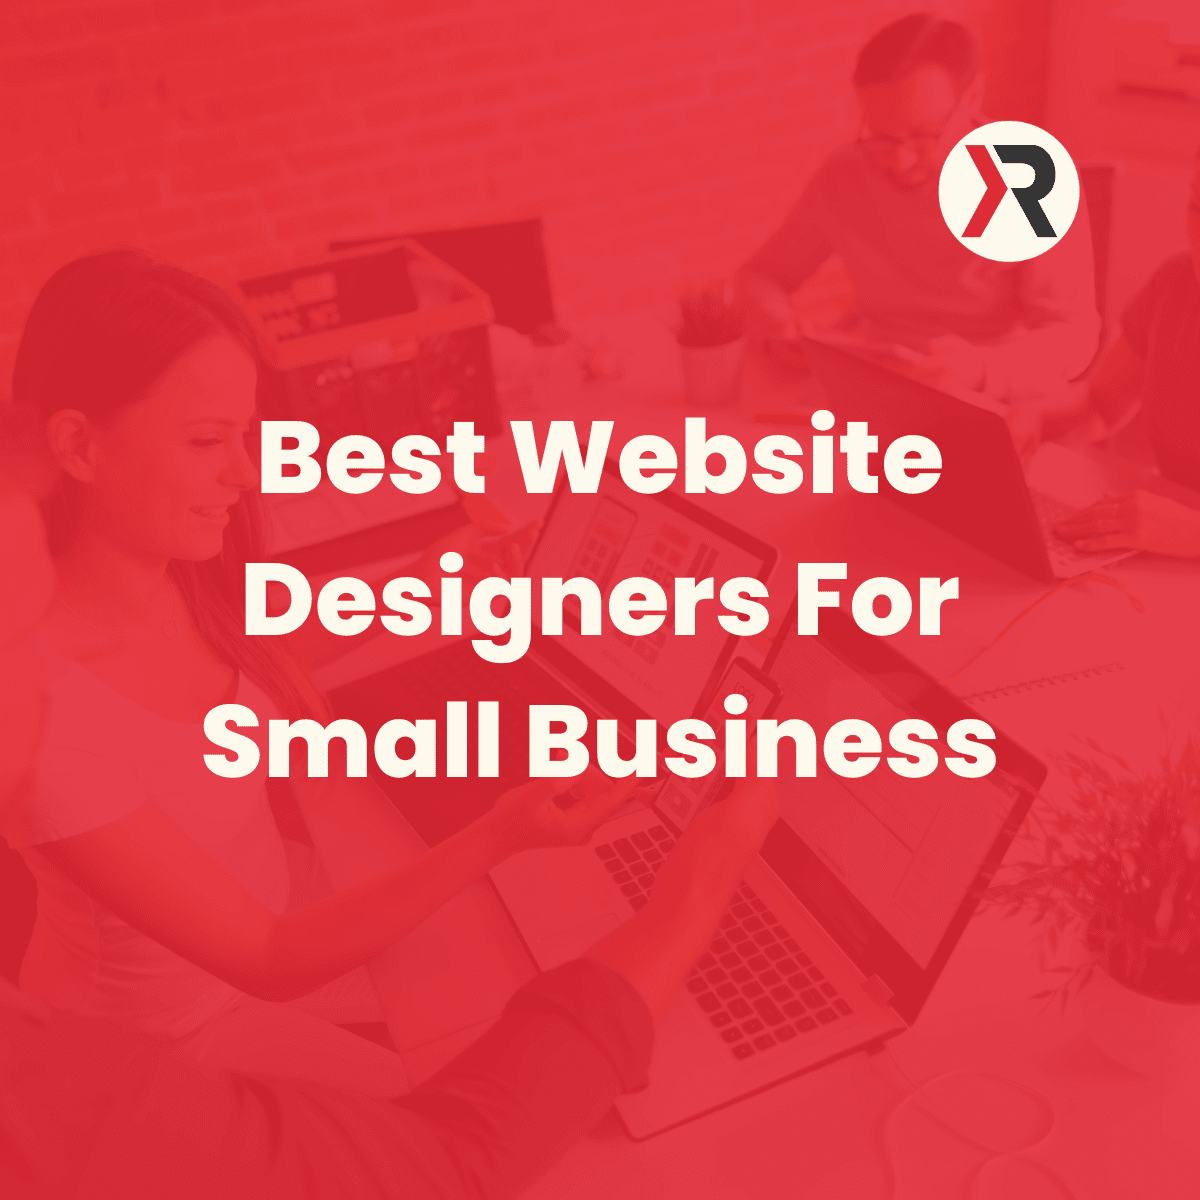 Best Website Designers For Small Business